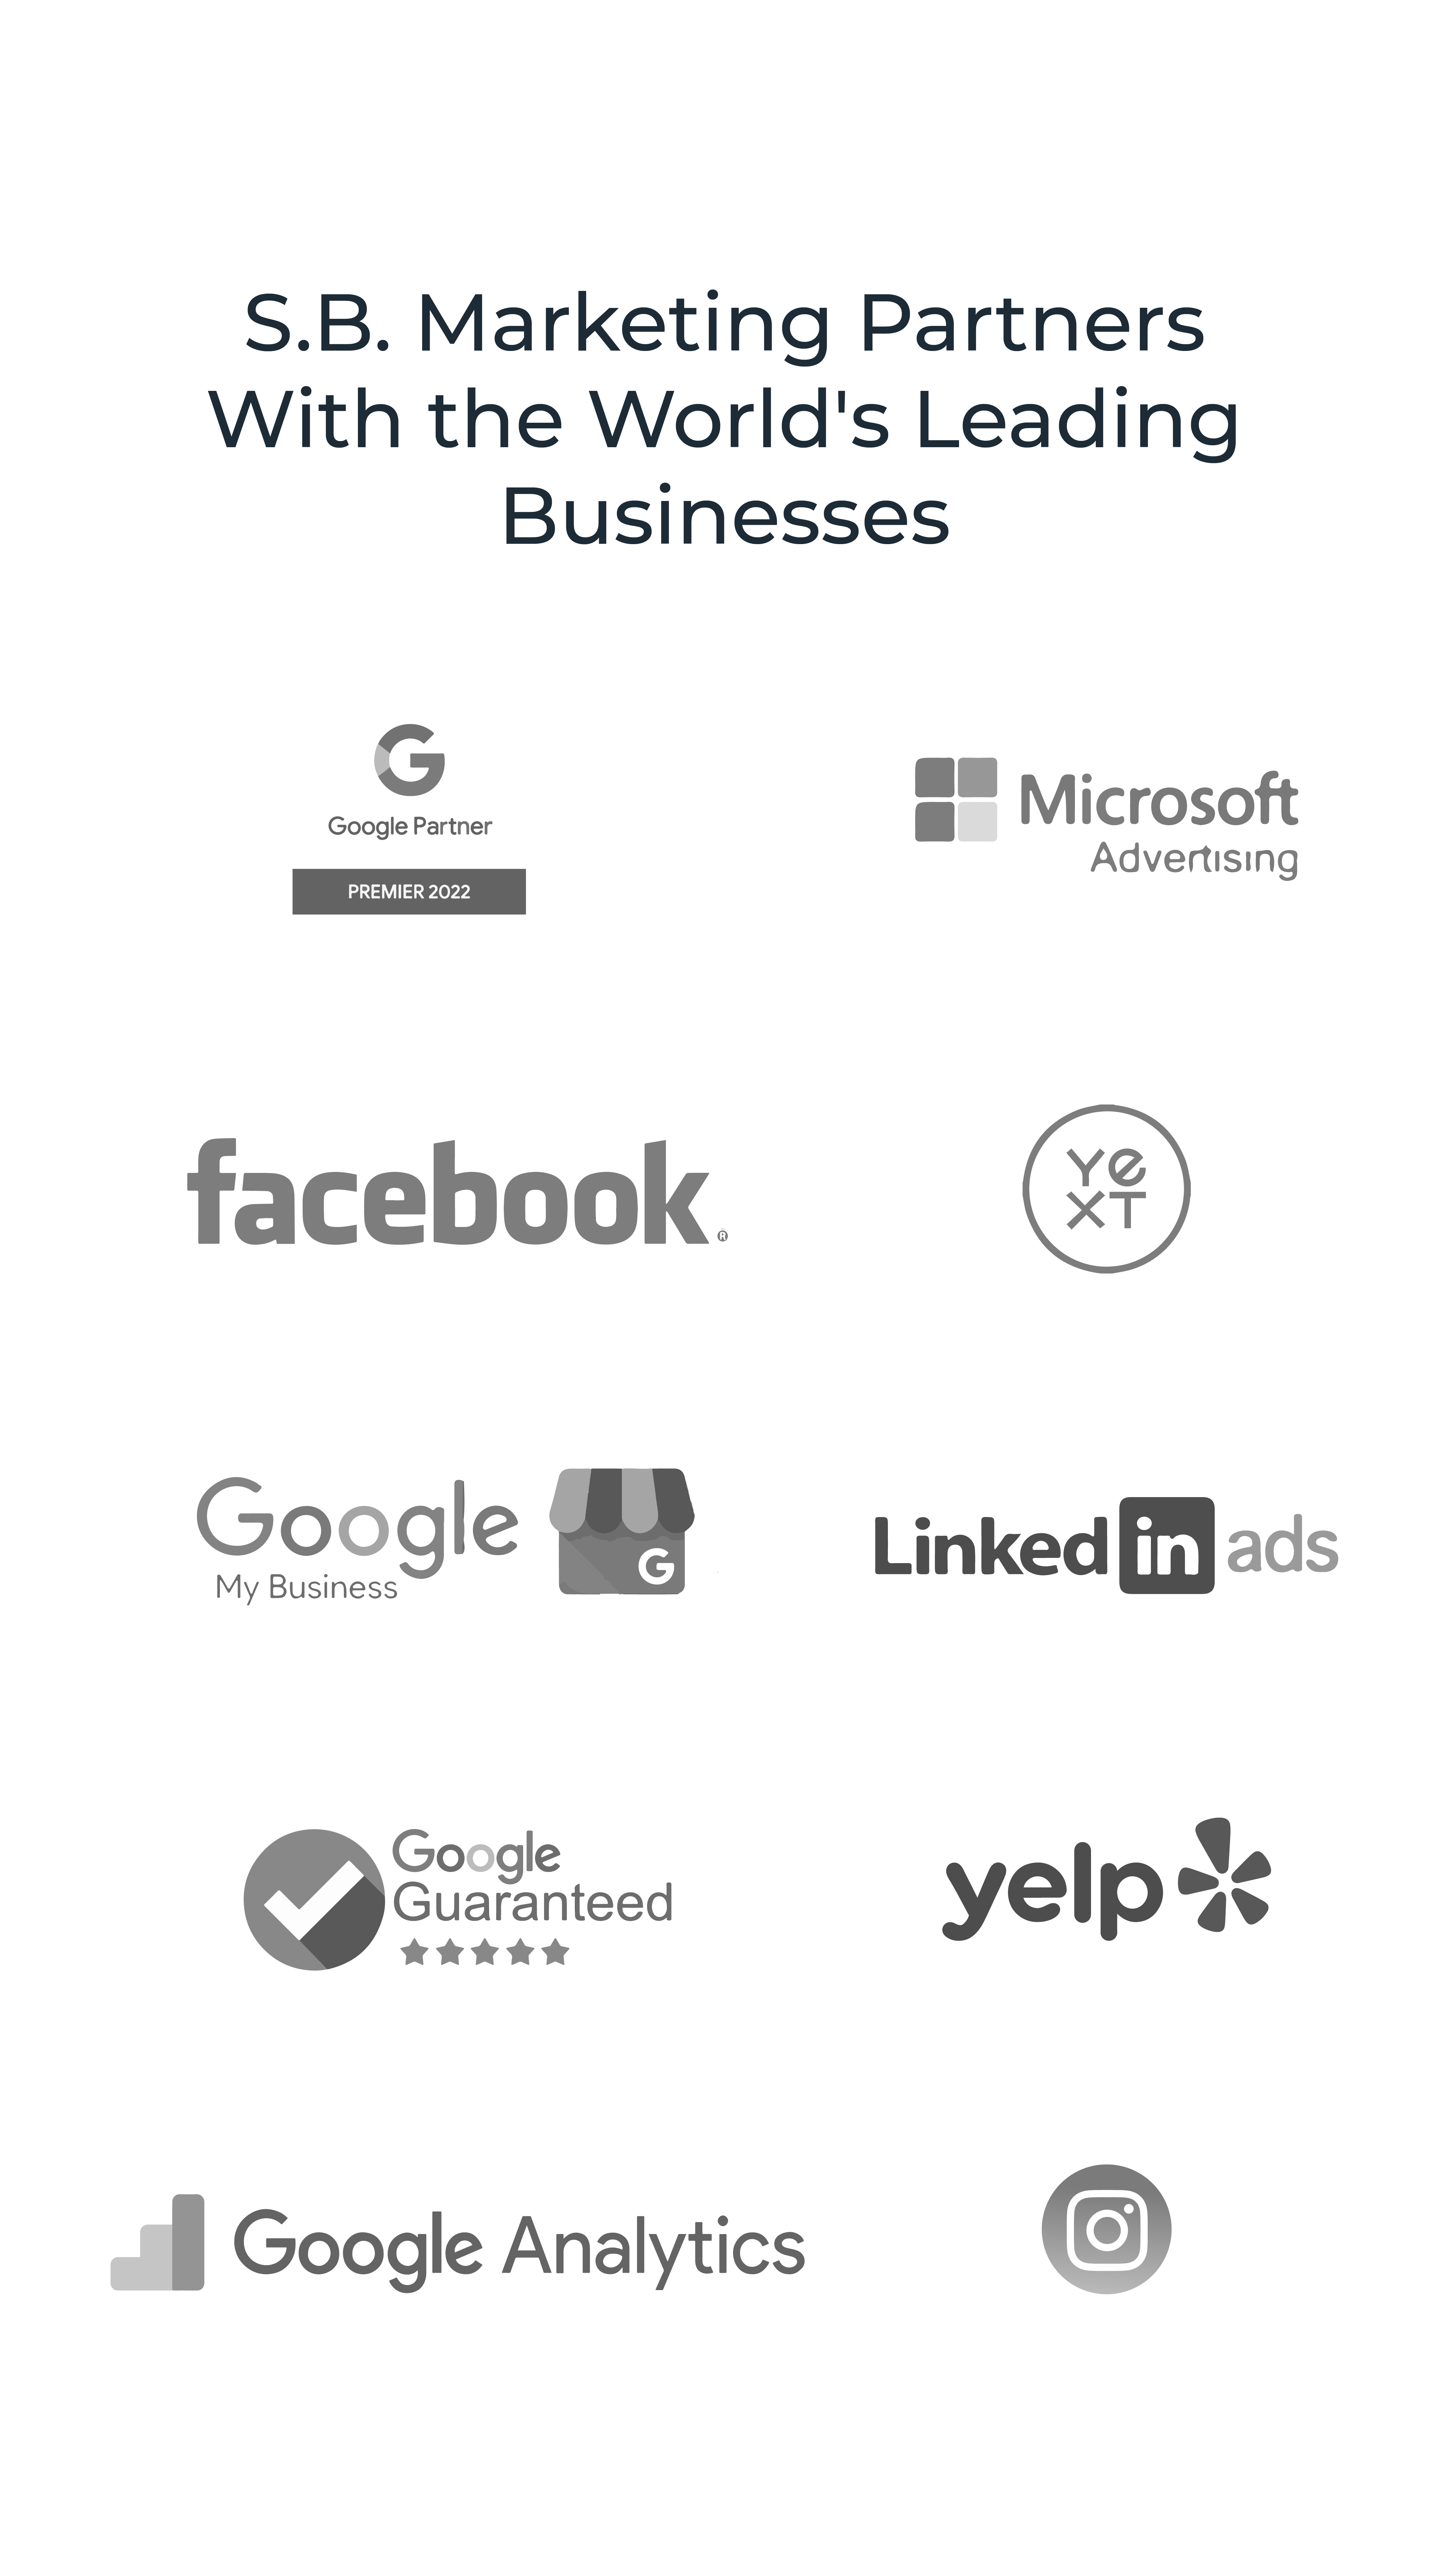 S.B. Marketing Partners with the worlds leading businesses.